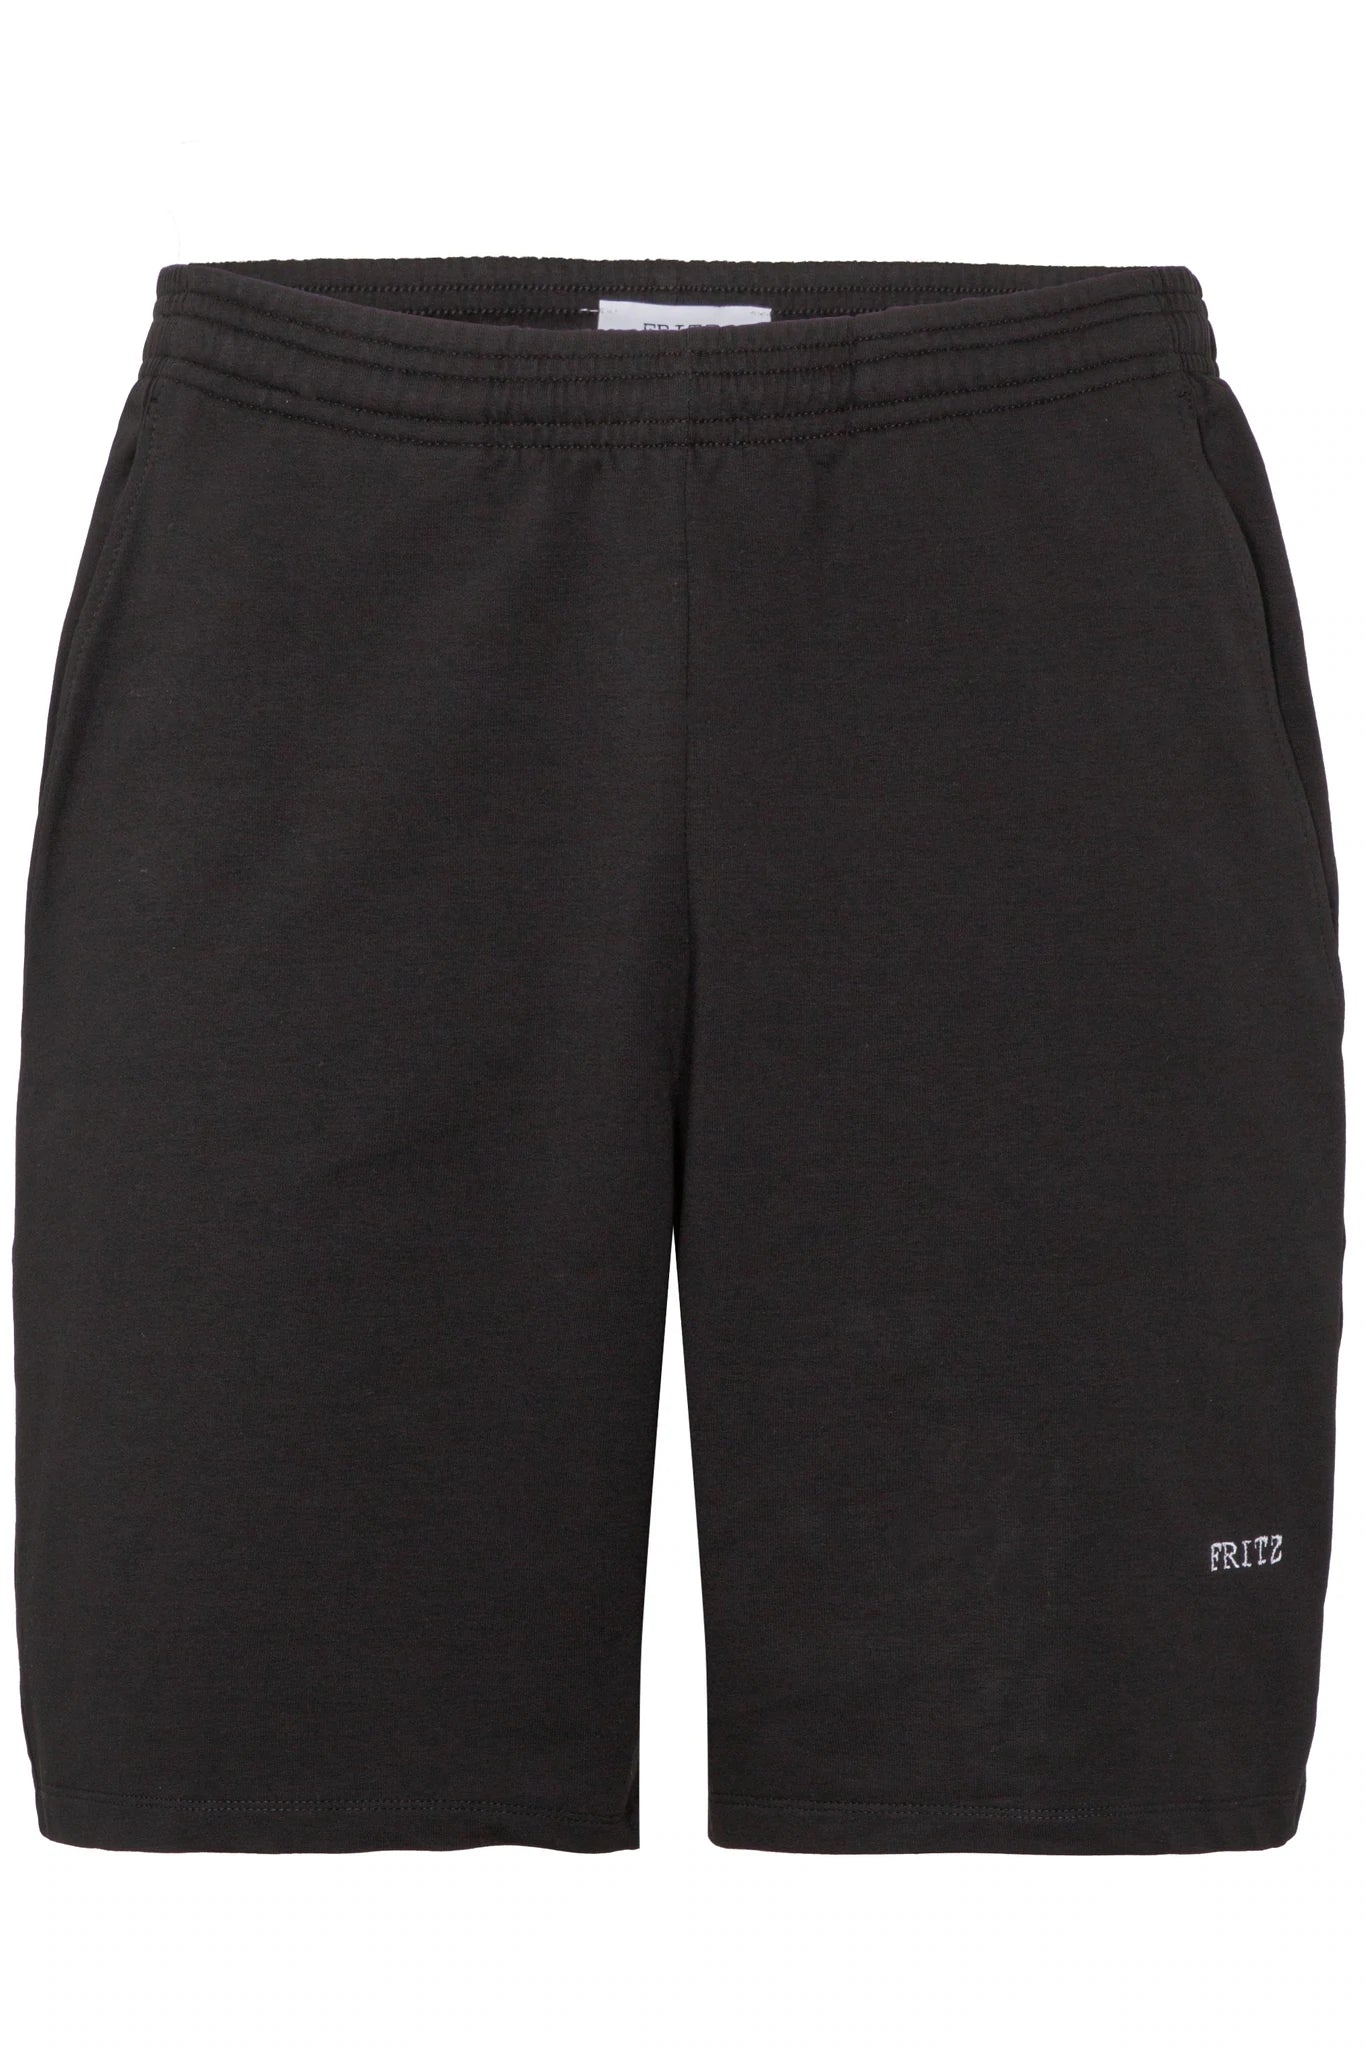 THE SHORTS - BLACK-  FRITZ THE LABEL